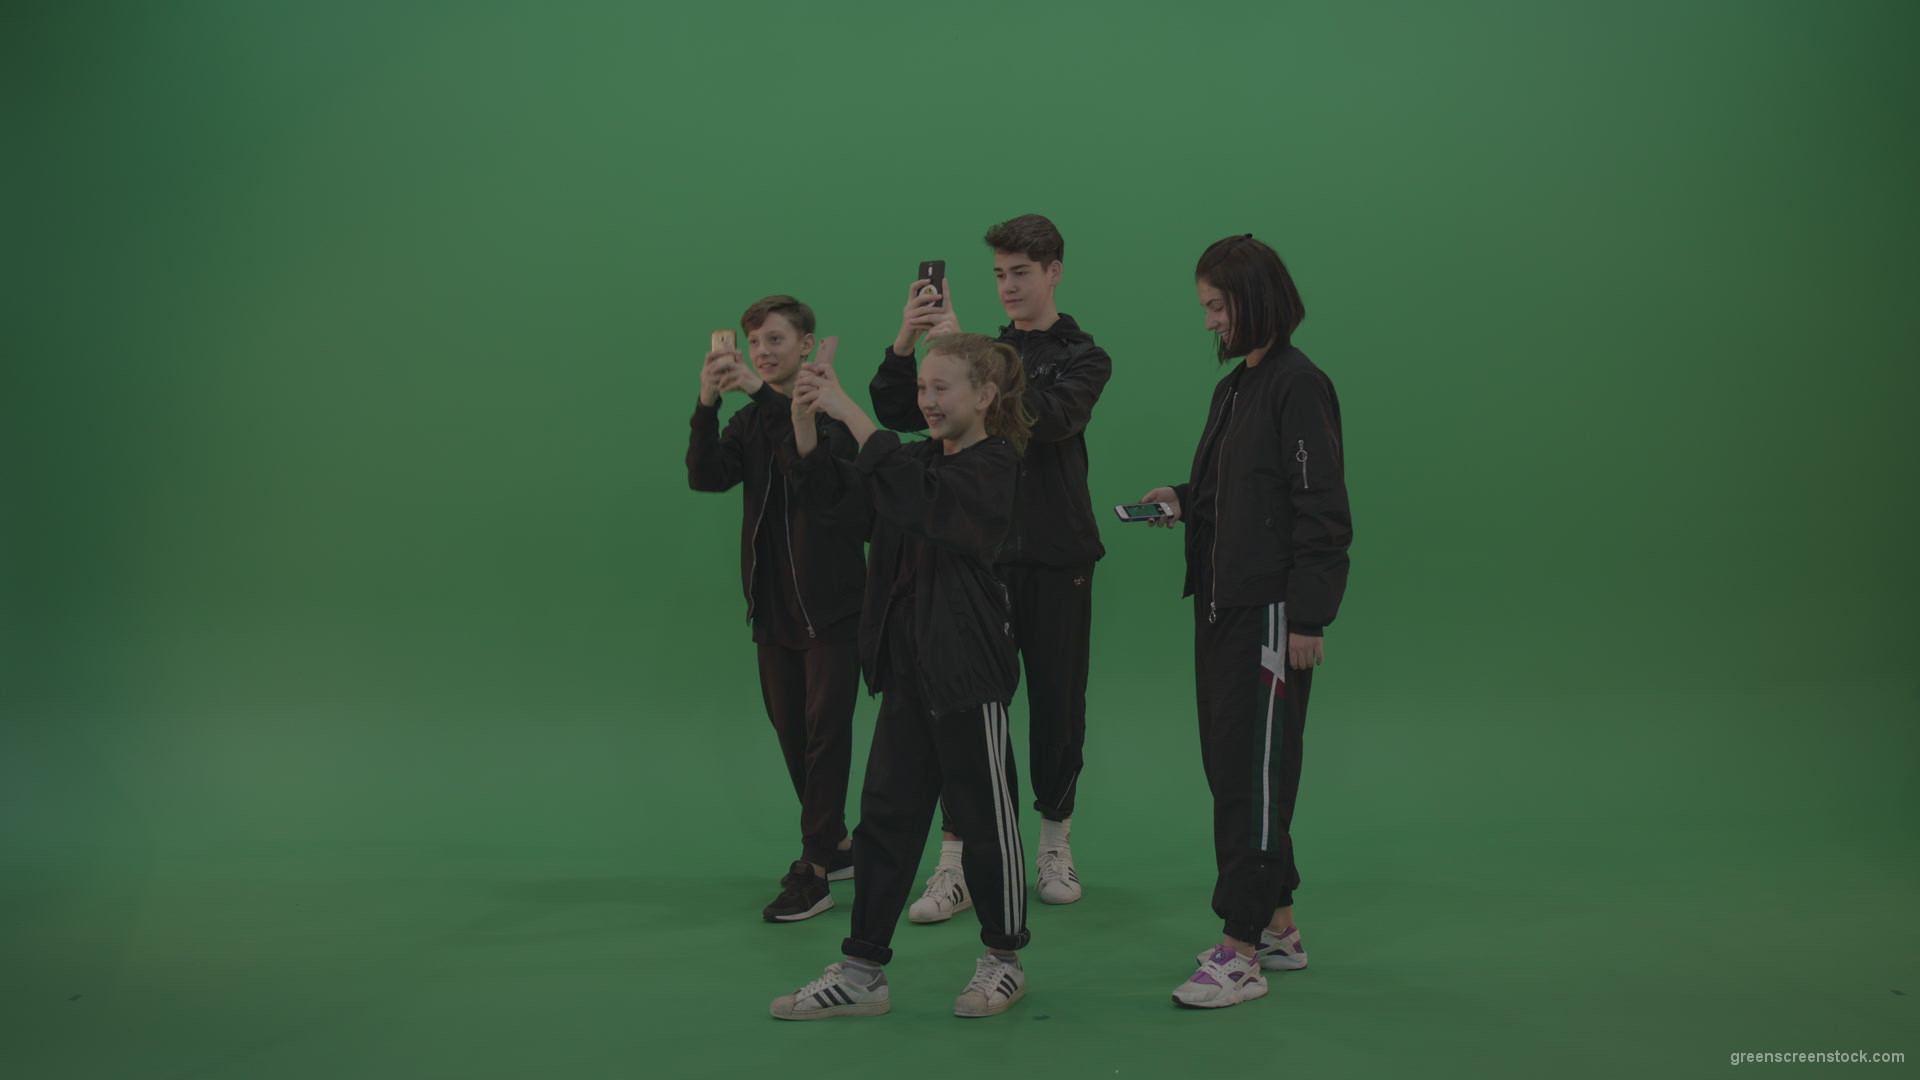 Four-kids-in-black-wears-take-pictures-over-chromakey-background_001 Green Screen Stock